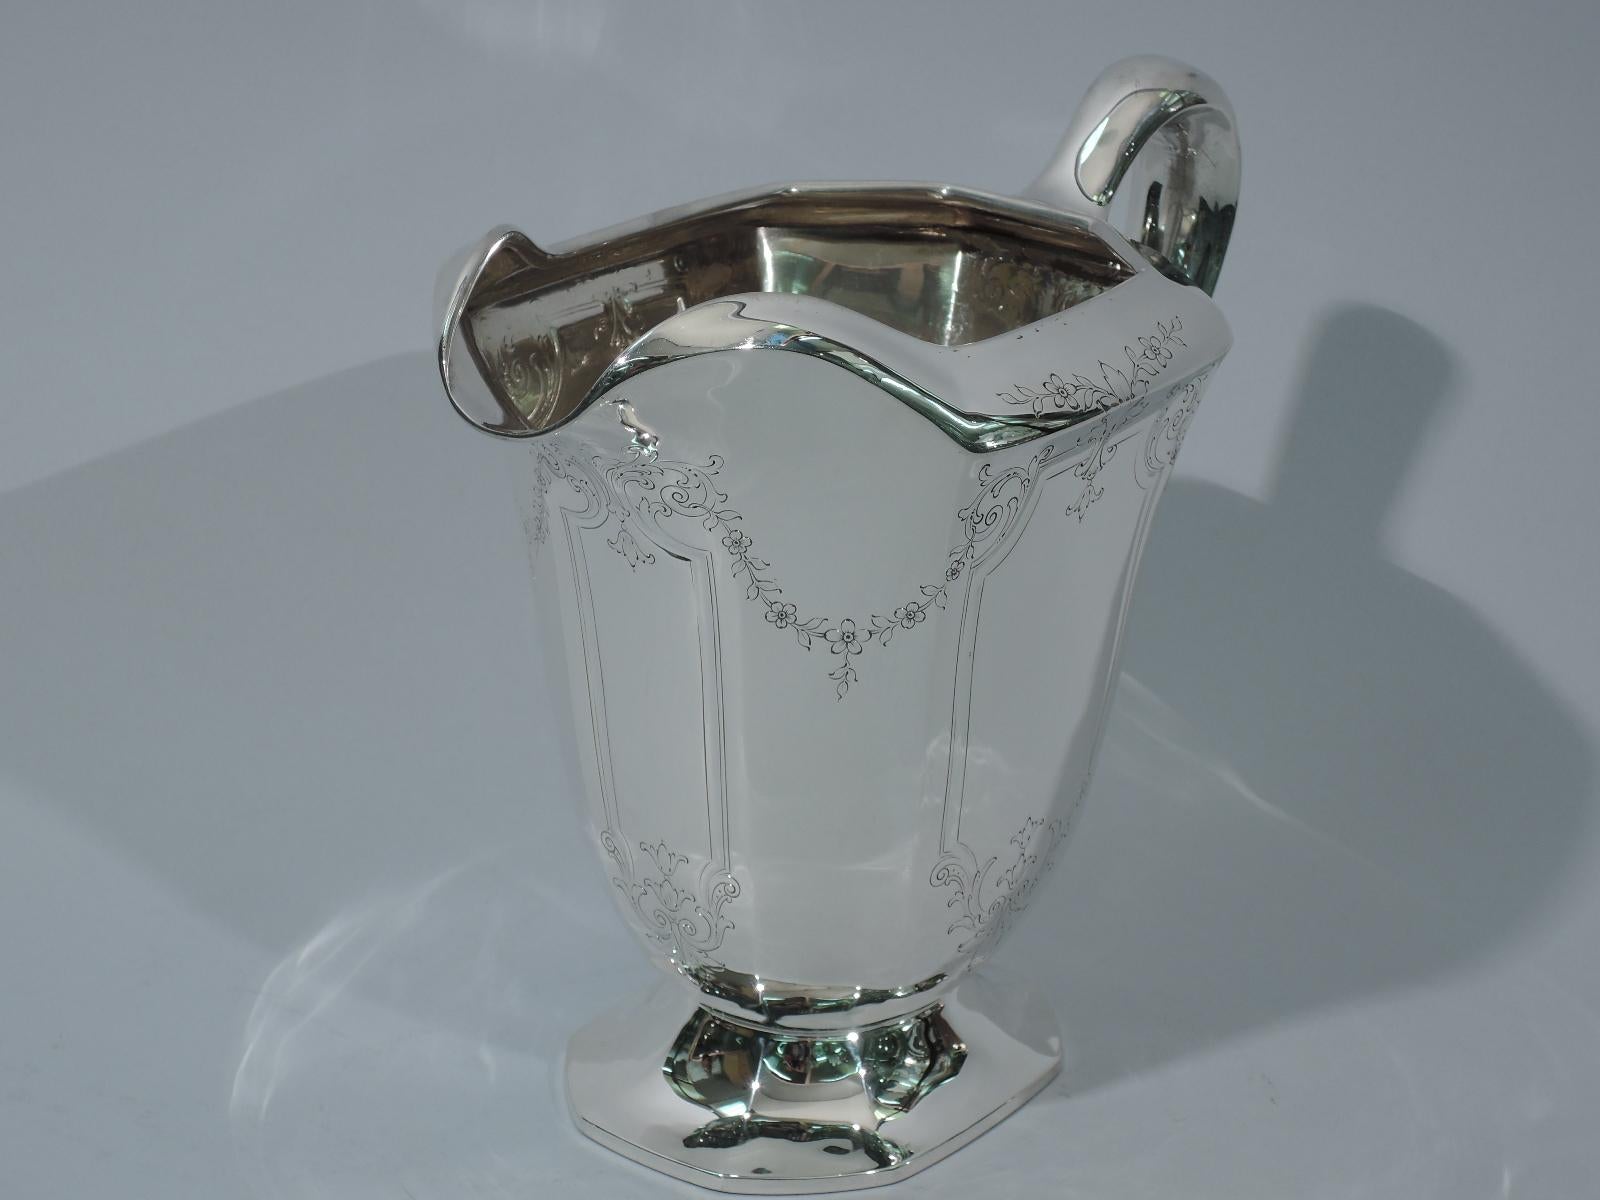 Edwardian sterling silver water pitcher. Made by Graff, Washbourne & Dunn in New York. Chamfered rectilinear body and foot, and scrolled handle. Engraved ornament: Curvilinear frames with scrolls and foliage linked by floral garlands. Hallmark